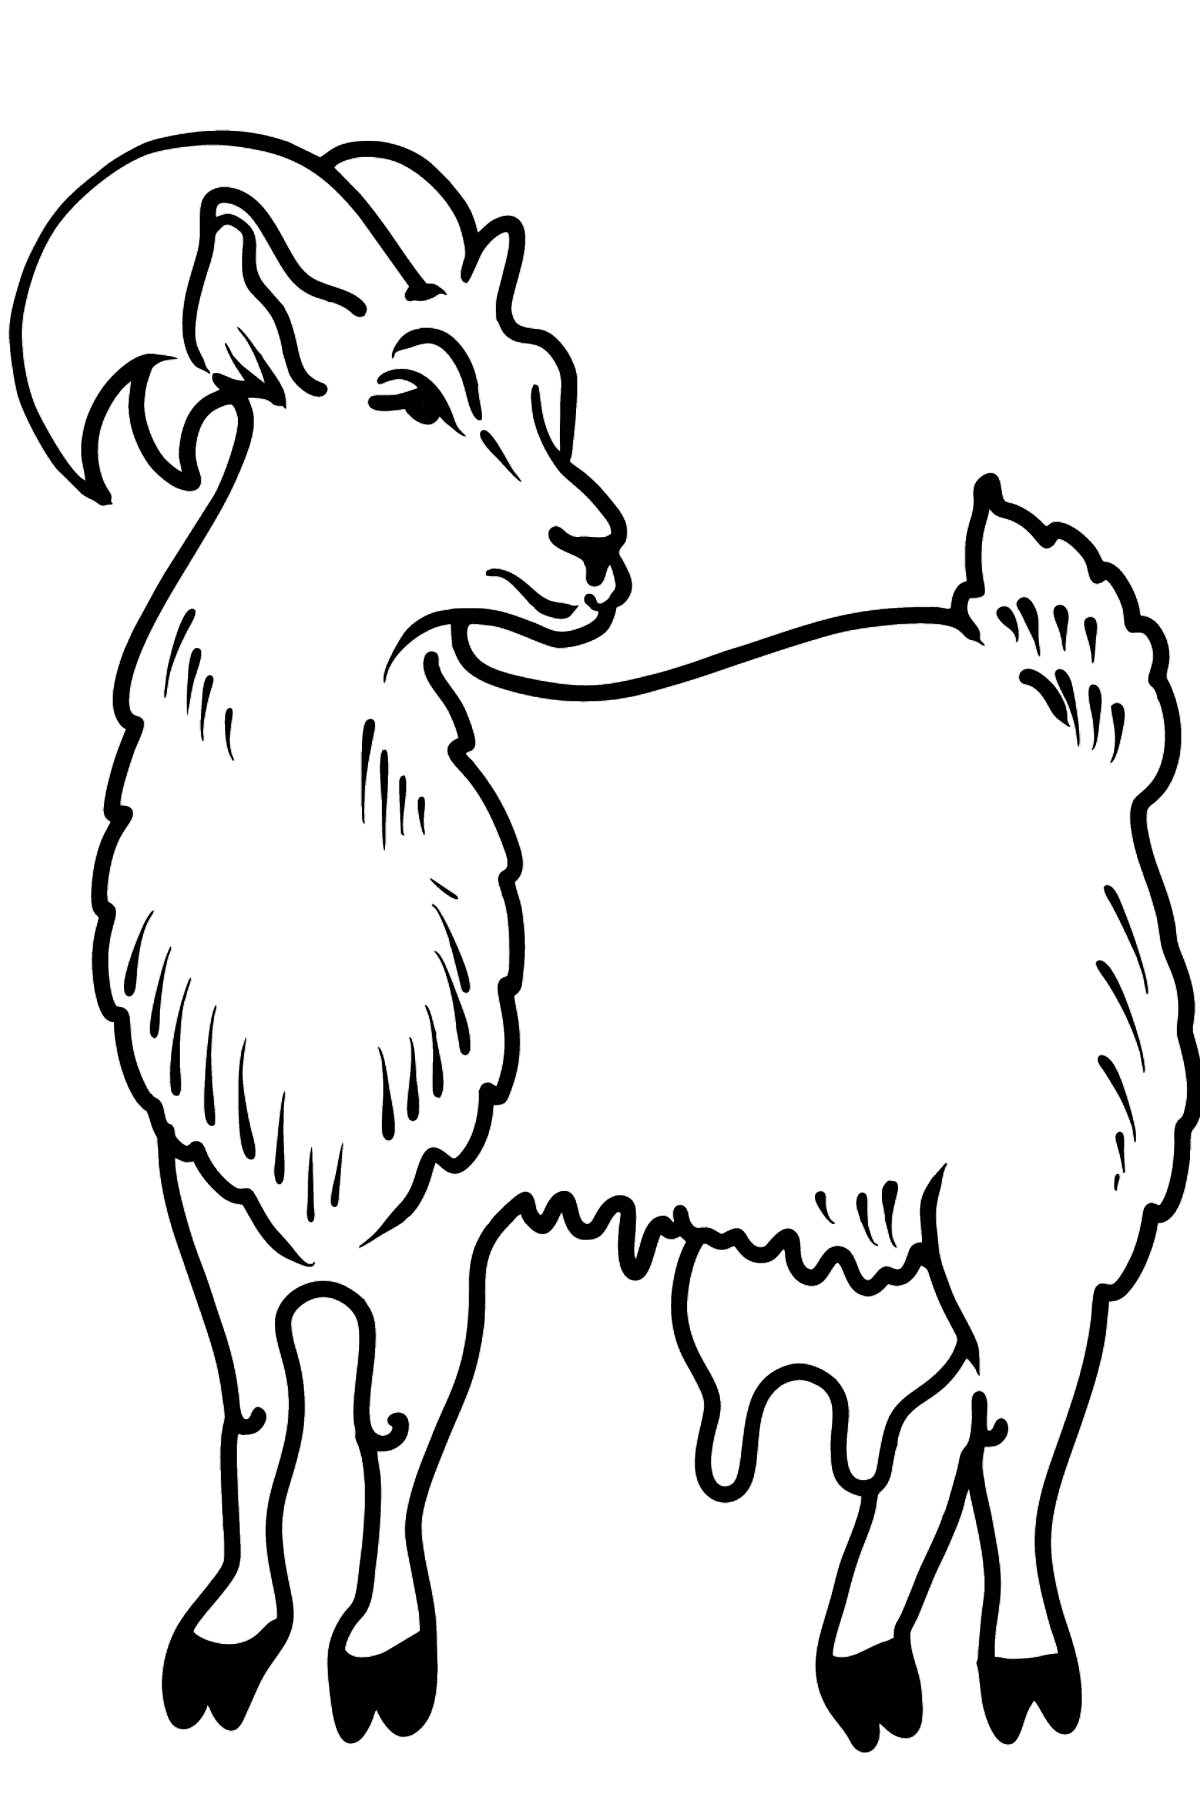 Goat coloring page - Coloring Pages for Kids